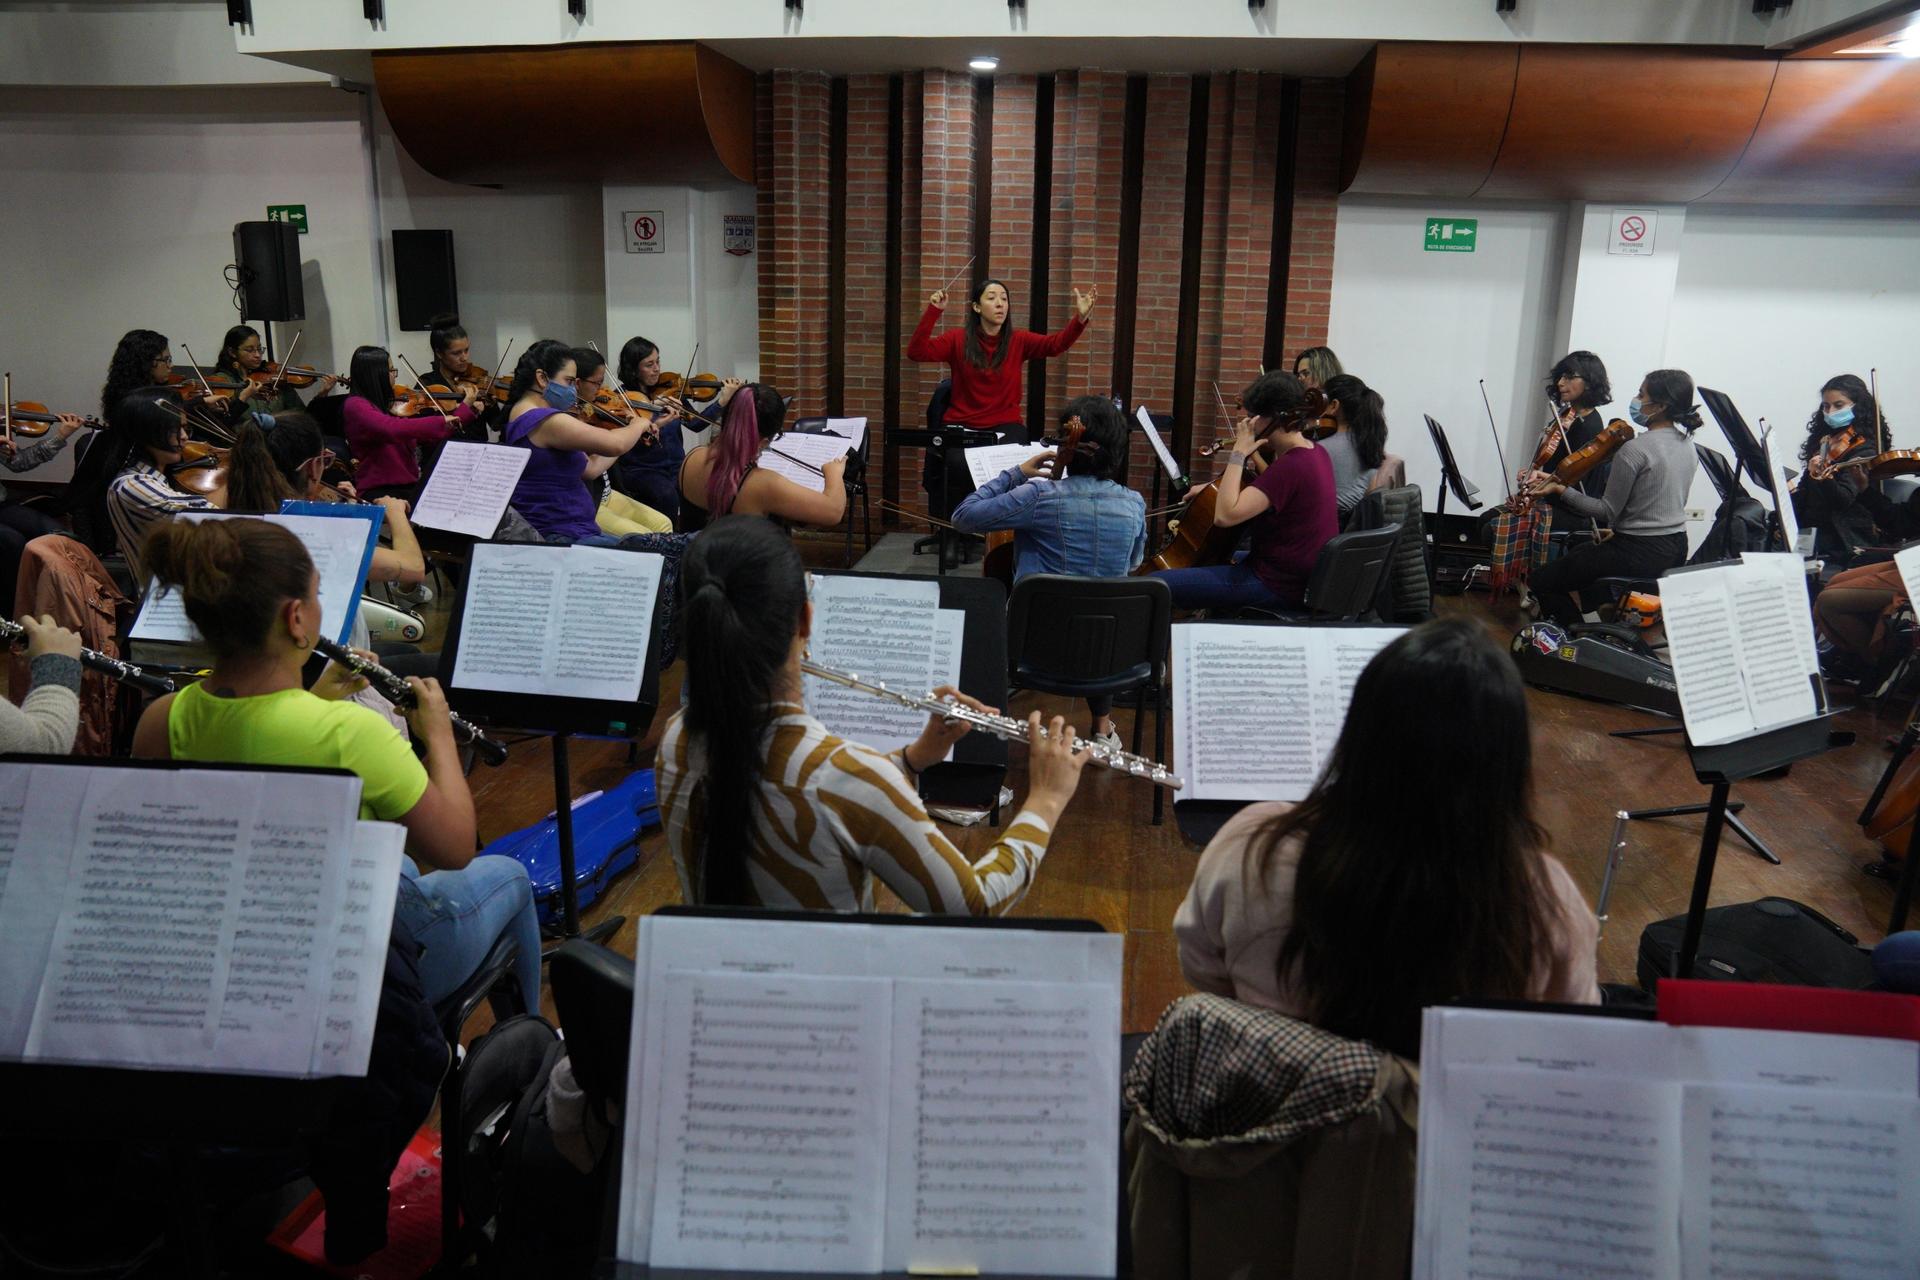 Paola Avila conducts as the Bogotá Philharmonic Women’s Orchestra rehearses a piece by female composer Louise Farrenc